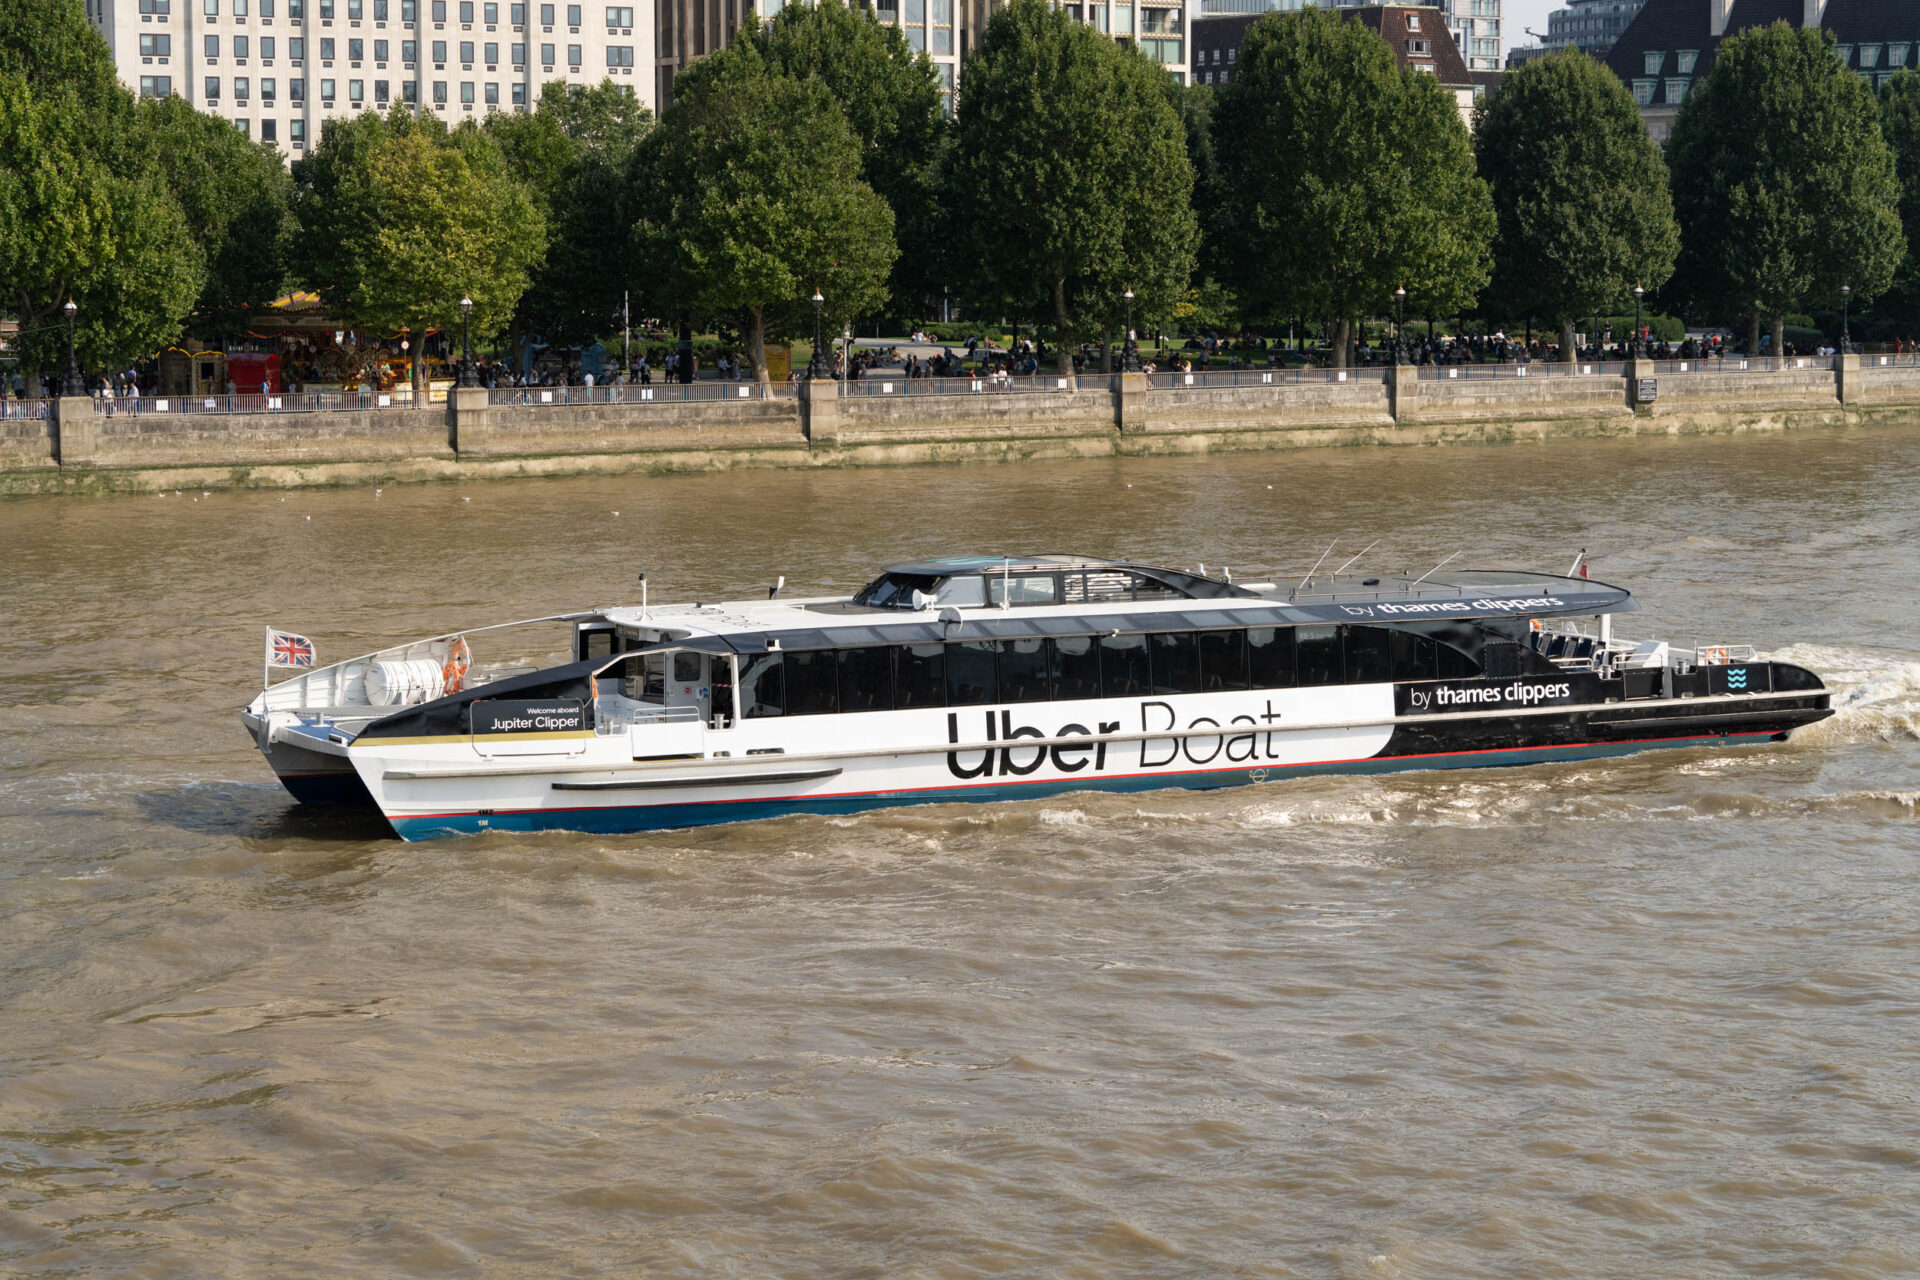 Uber Boat By Thames Clippers The Northbank Bid